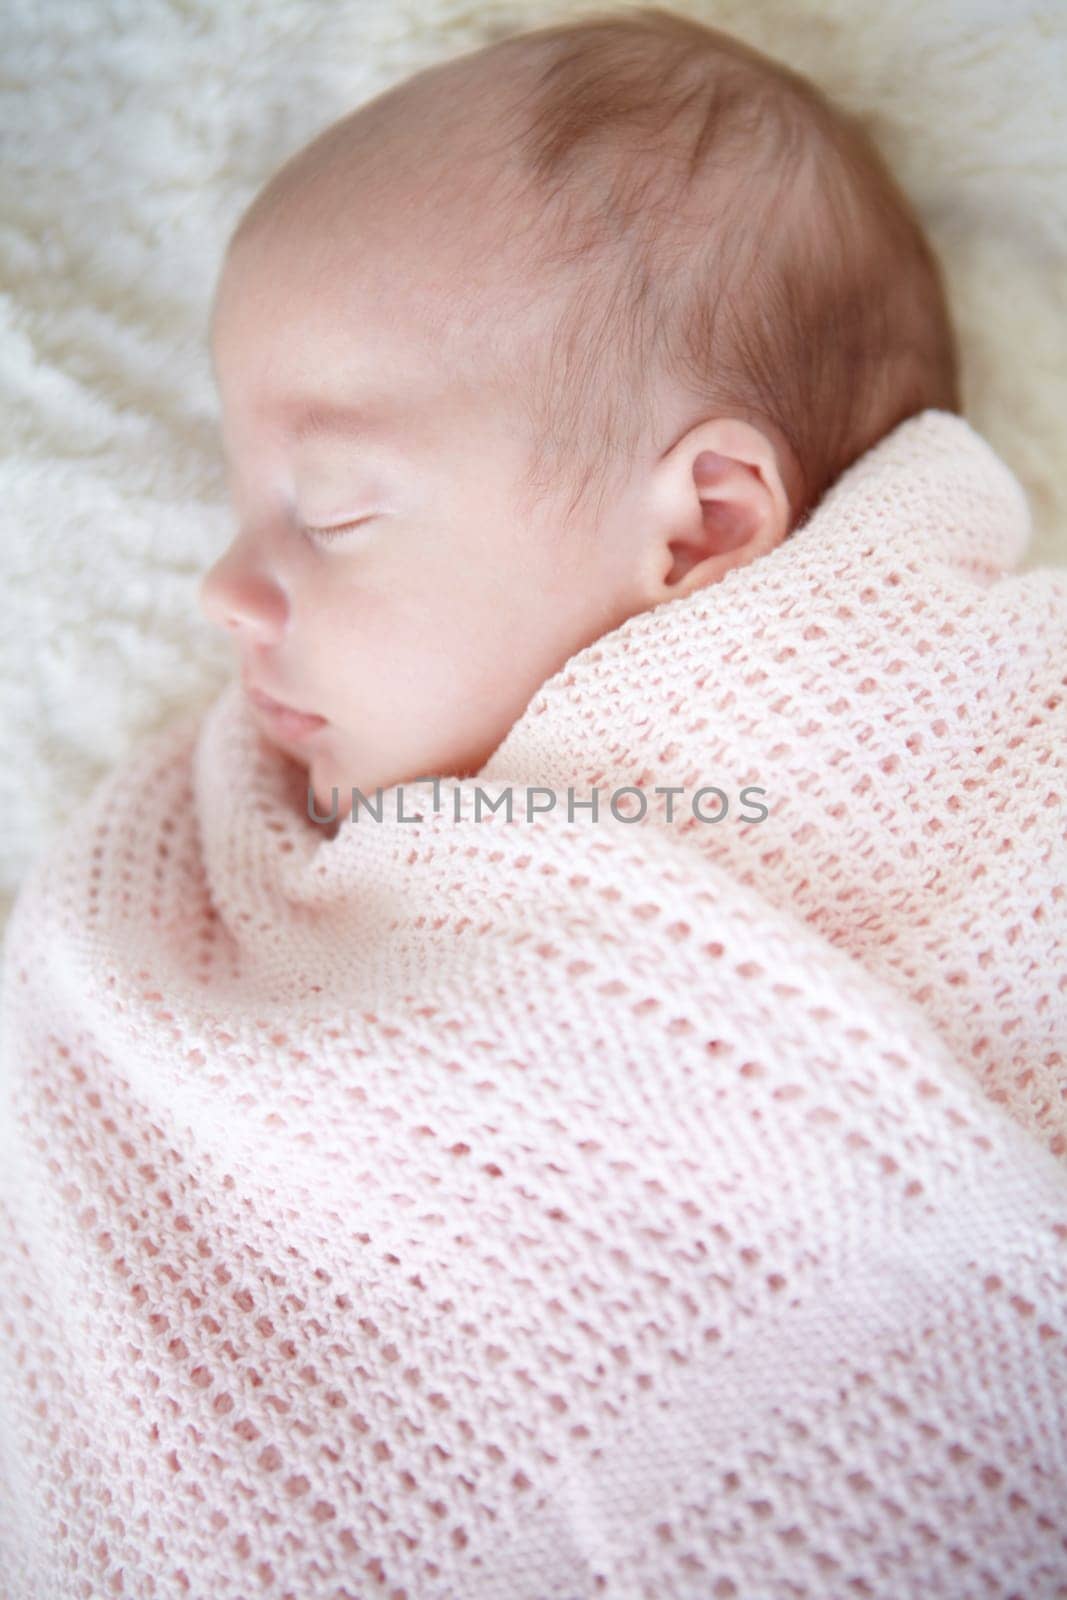 Baby, closeup and sleeping on bed, blanket and tired in profile in family home for growth, peace and comfort. Newborn infant girl, exhausted and childhood development in nursery, bedroom and house.